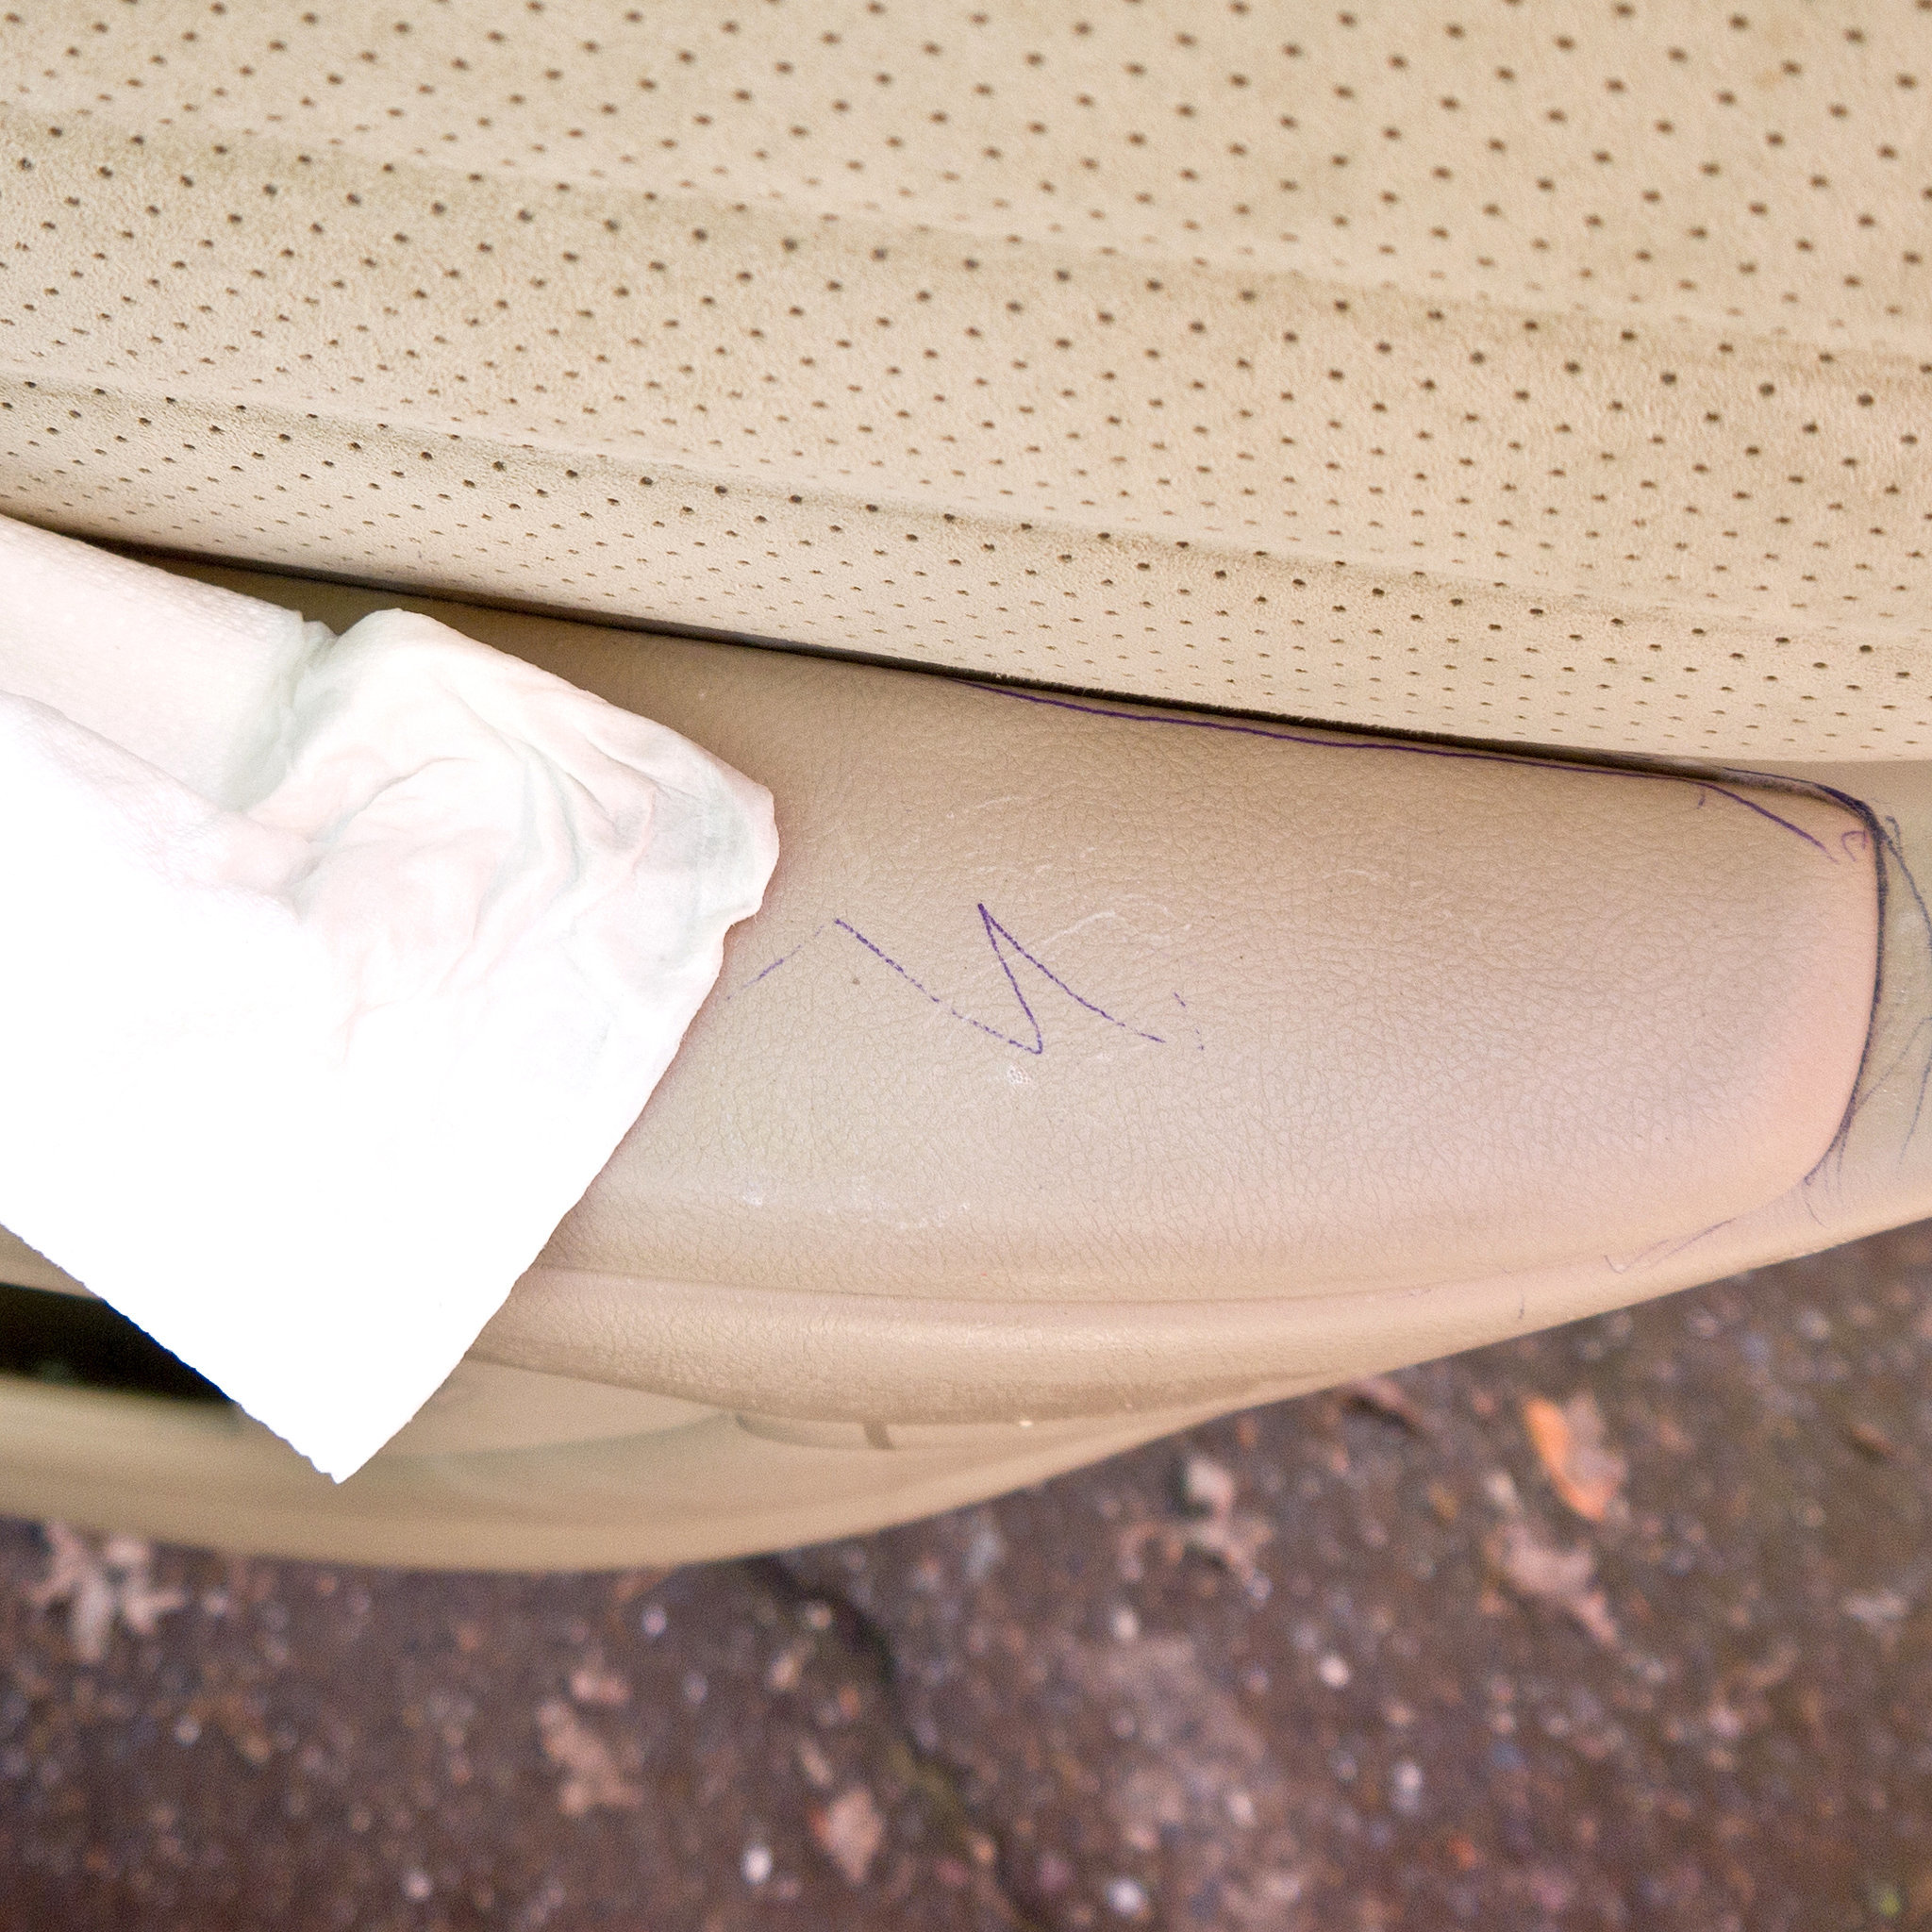 Remove Pen Marks From Car Interior, How To Get Ink Off Leather Seat